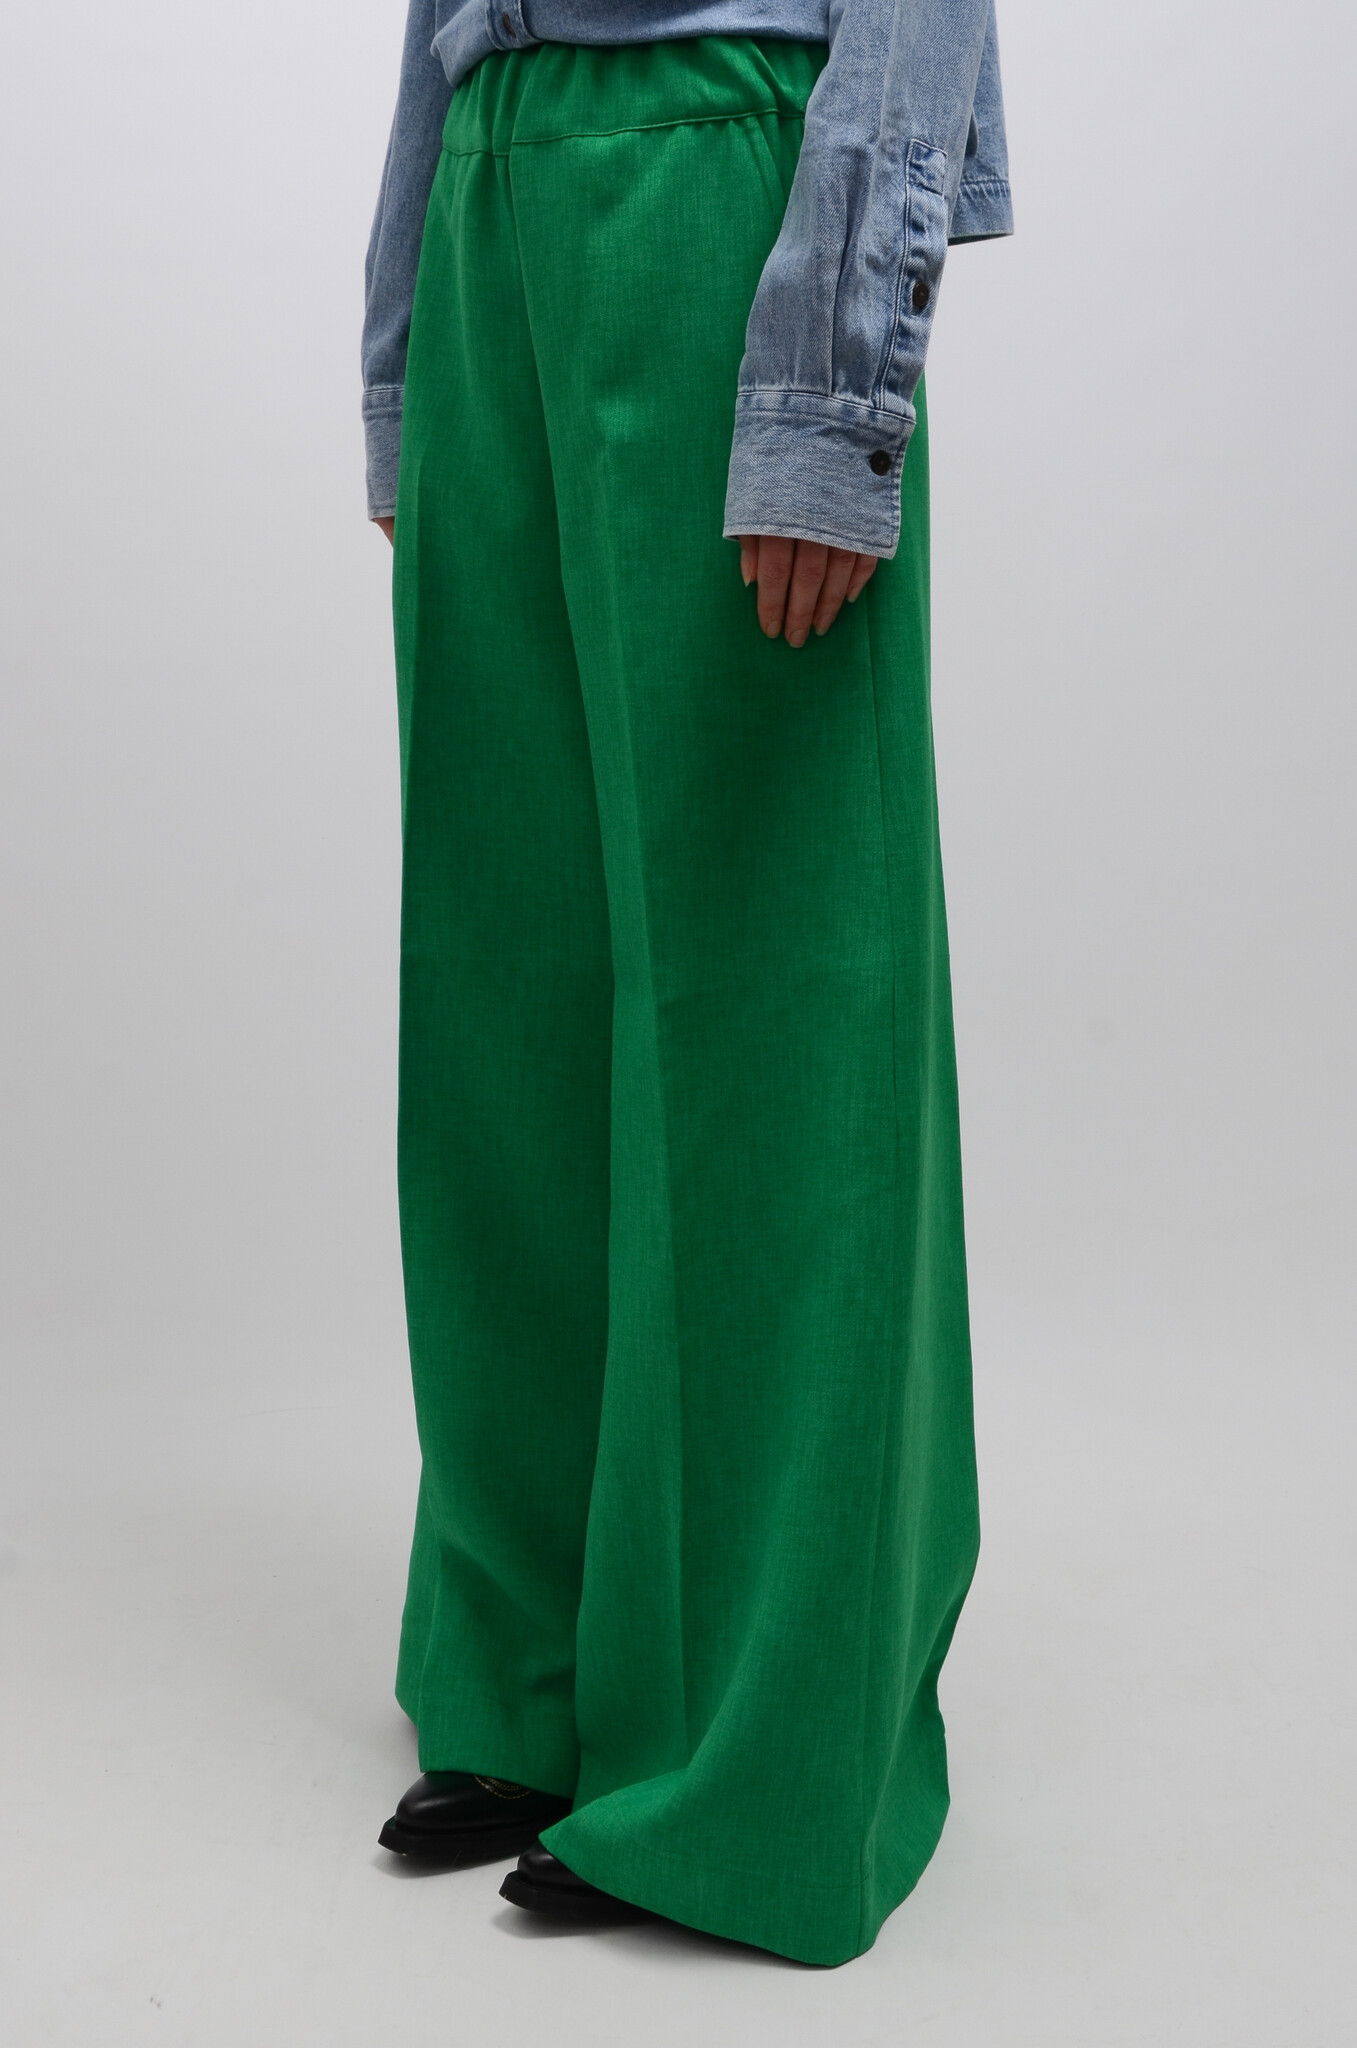 Super Lush Woody Pants in Parrot Green-4